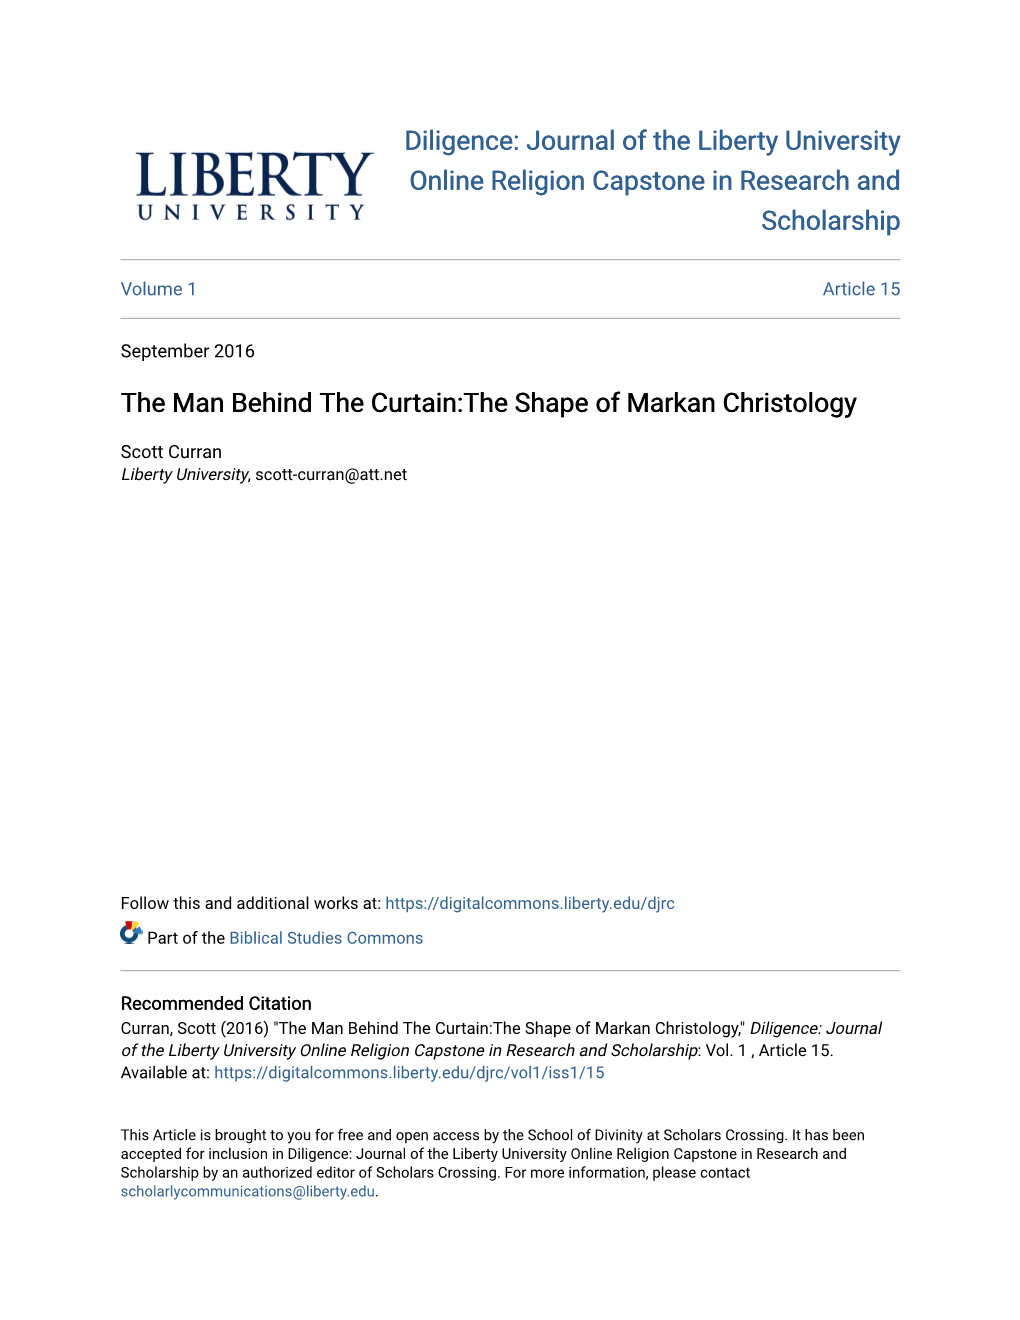 The Man Behind the Curtain:The Shape of Markan Christology